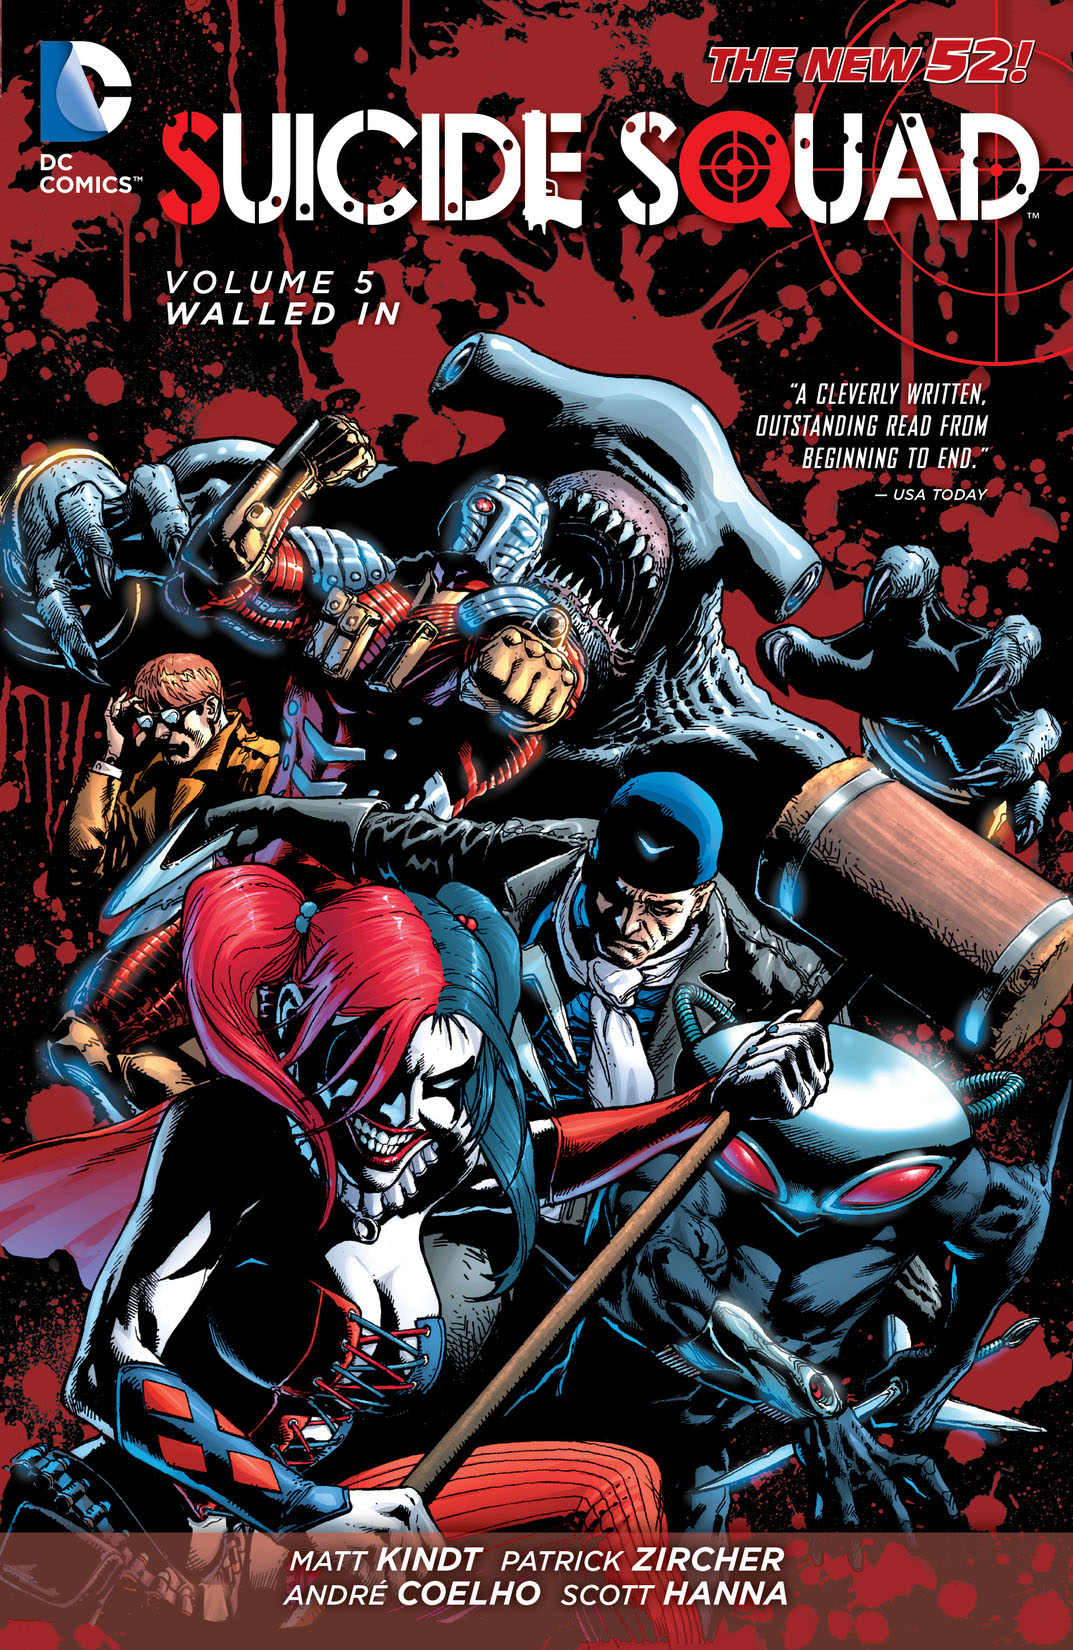 Suicide Squad Vol. 5: Walled In preview images